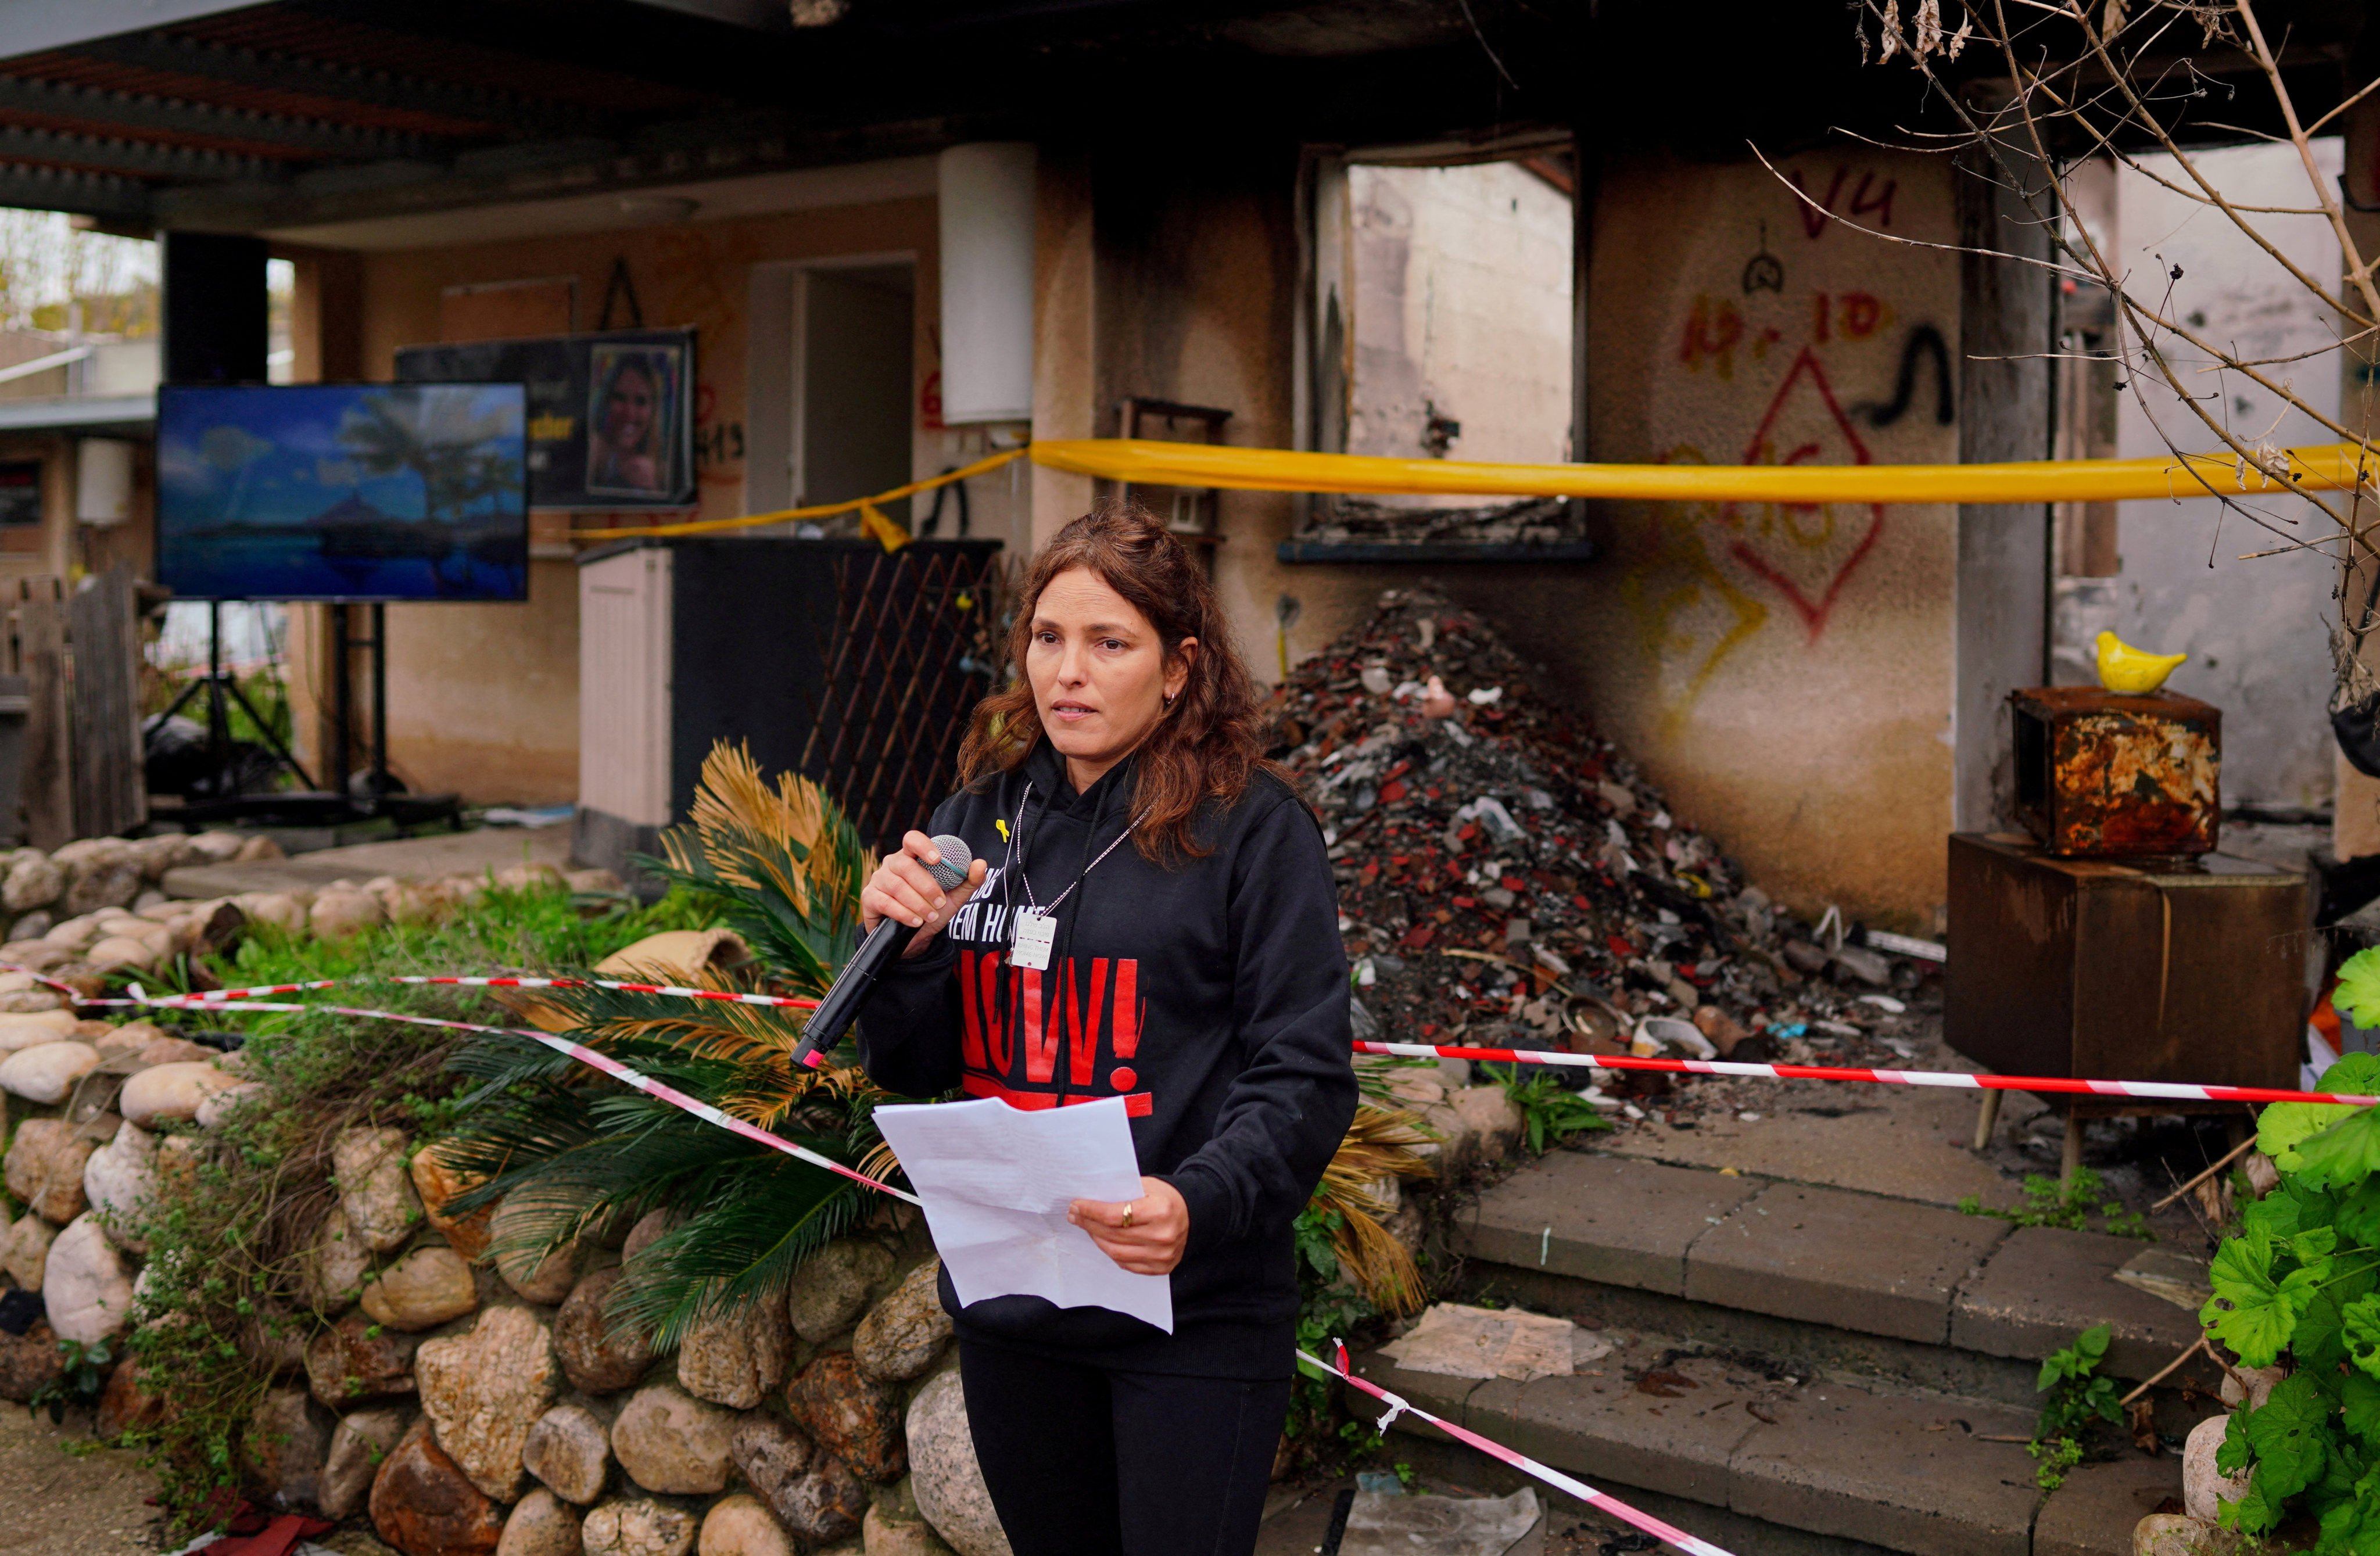 Released hostage Amit Soussana, kidnapped during the October 7 Hamas attack on Israel, in front of her destroyed home at the Kibbutz Kfar Aza, Israel, on January 29. Photo: Reuters